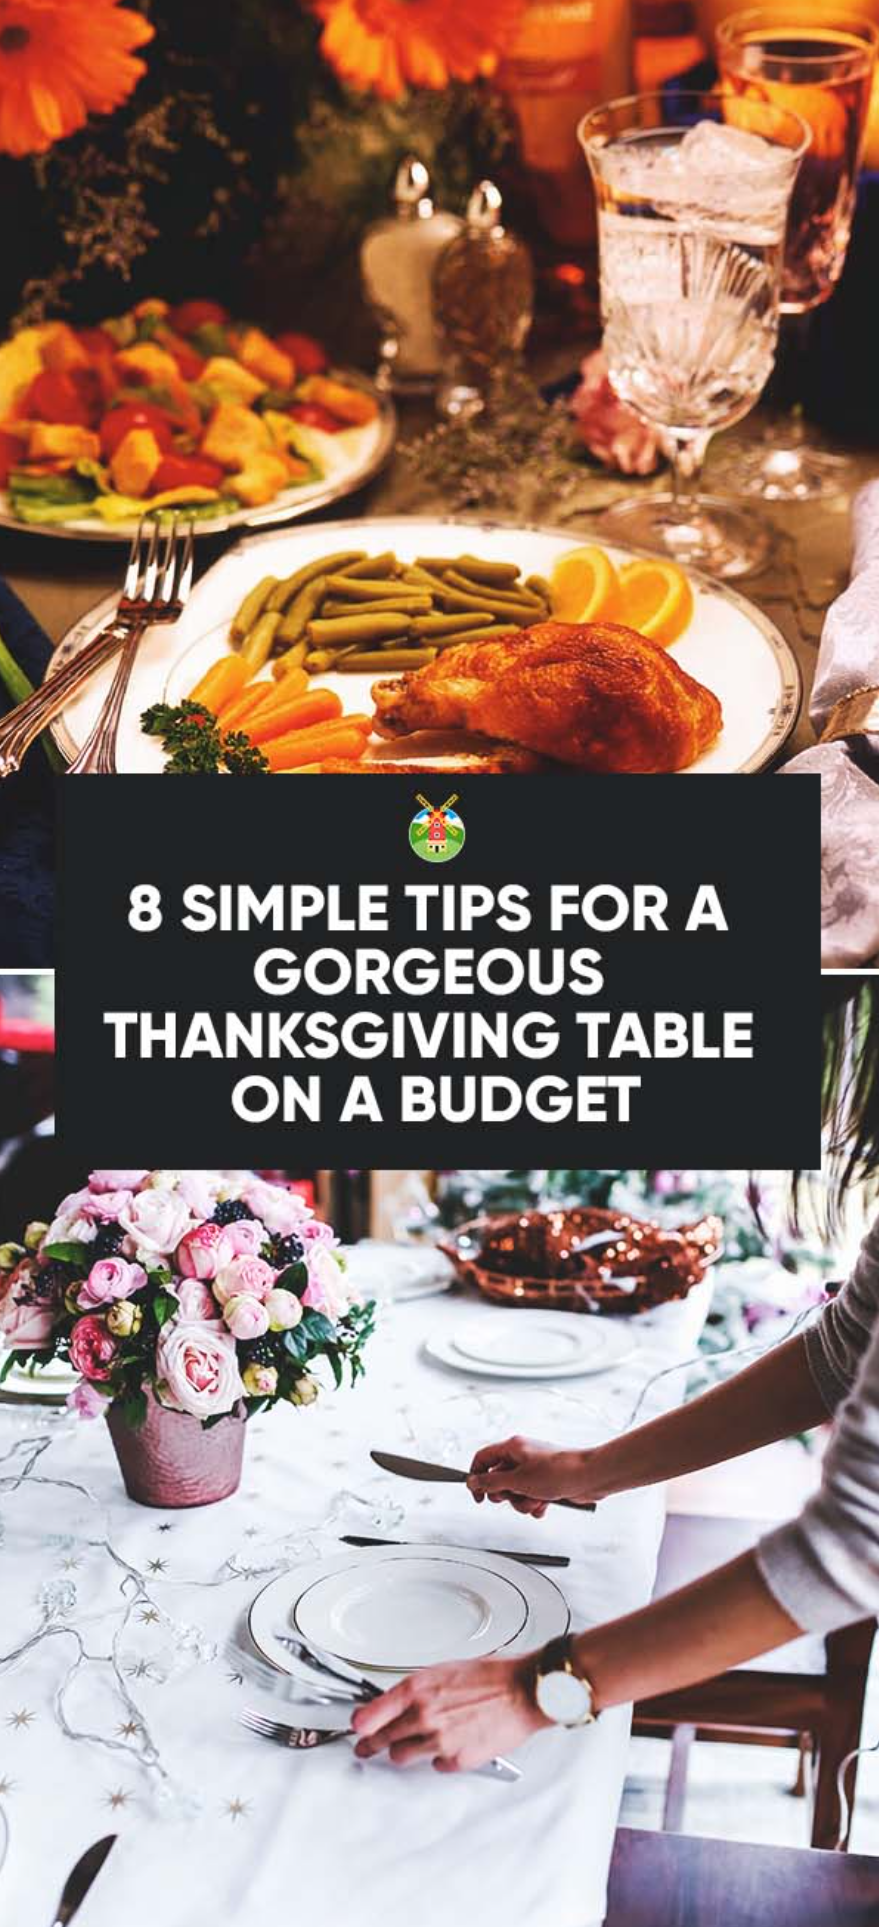 8 Simple Tips for a Gorgeous Thanksgiving Table on a Budget